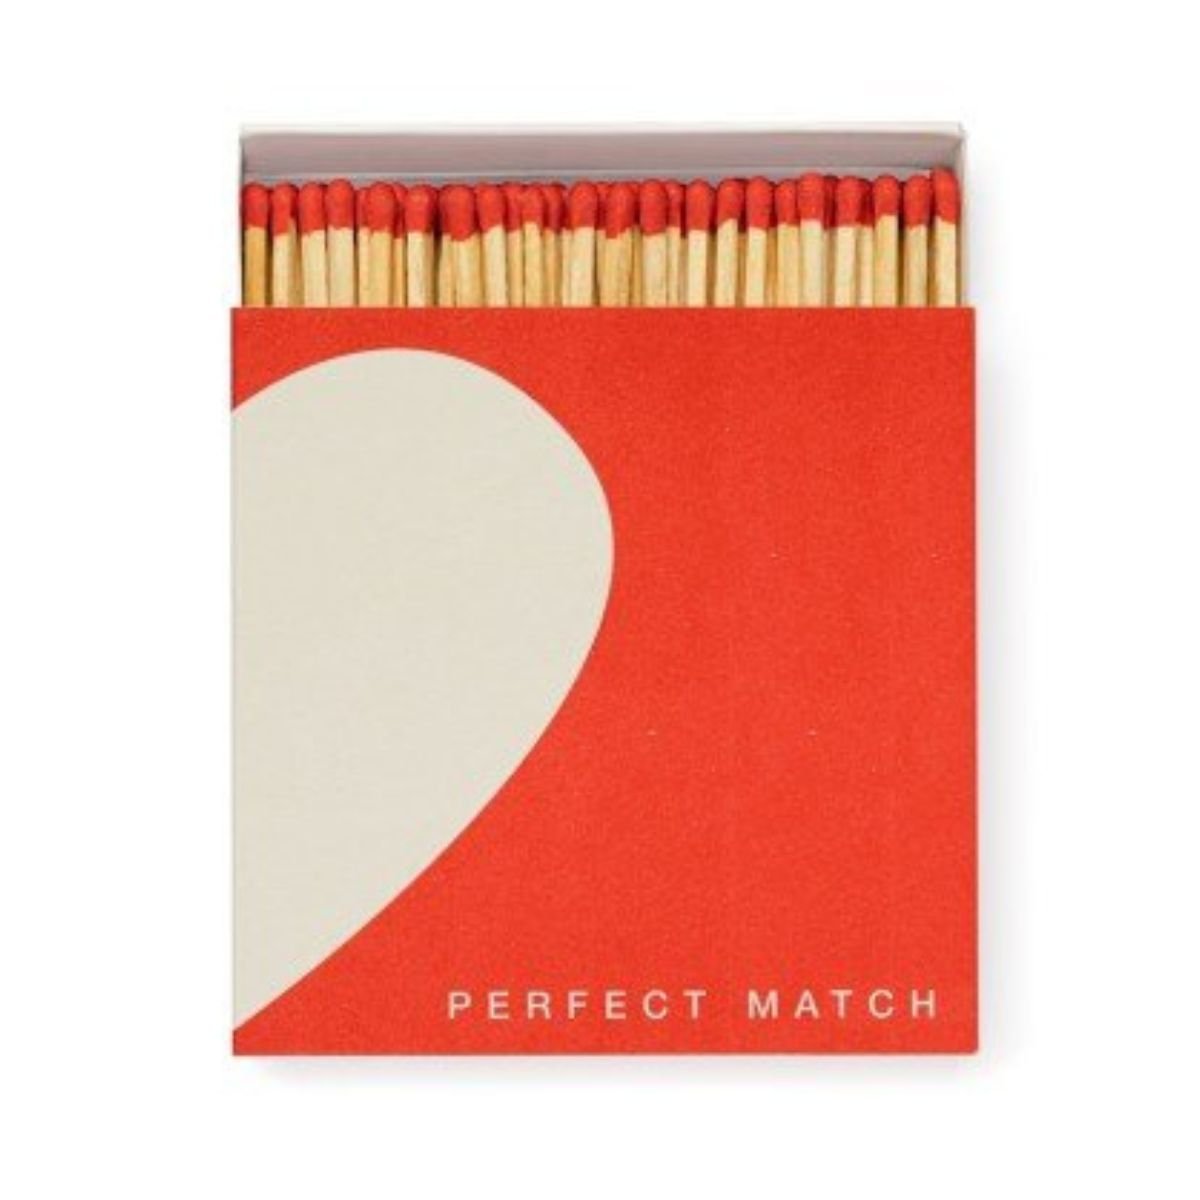 Luxury Matches - Perfect Match - Life of Riley